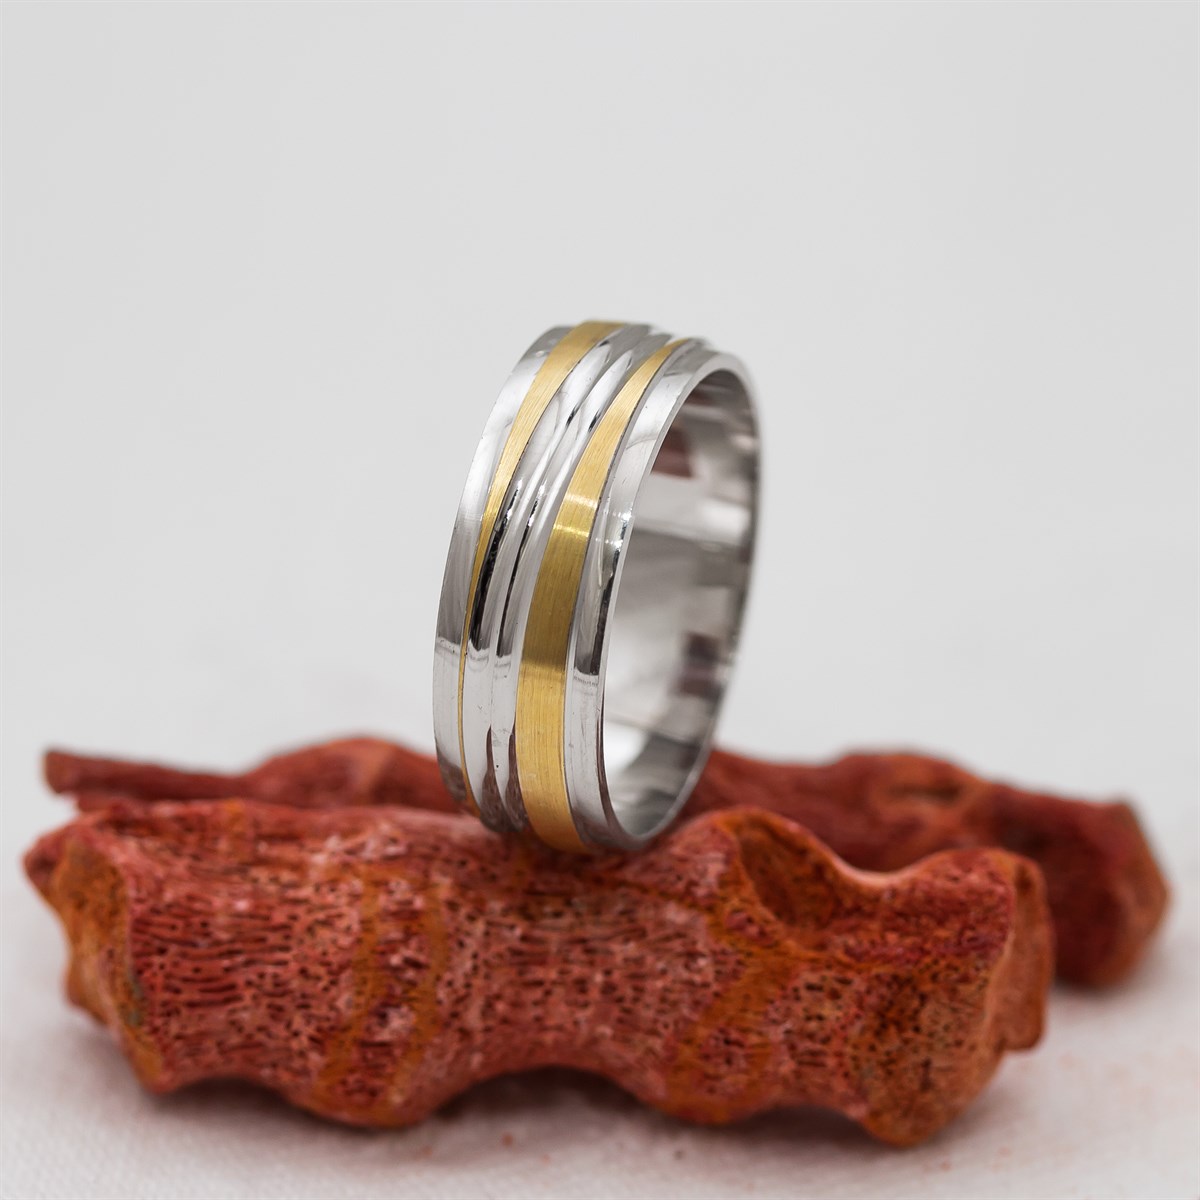 Unisex Silver Wedding Ring with Gold Color Transition